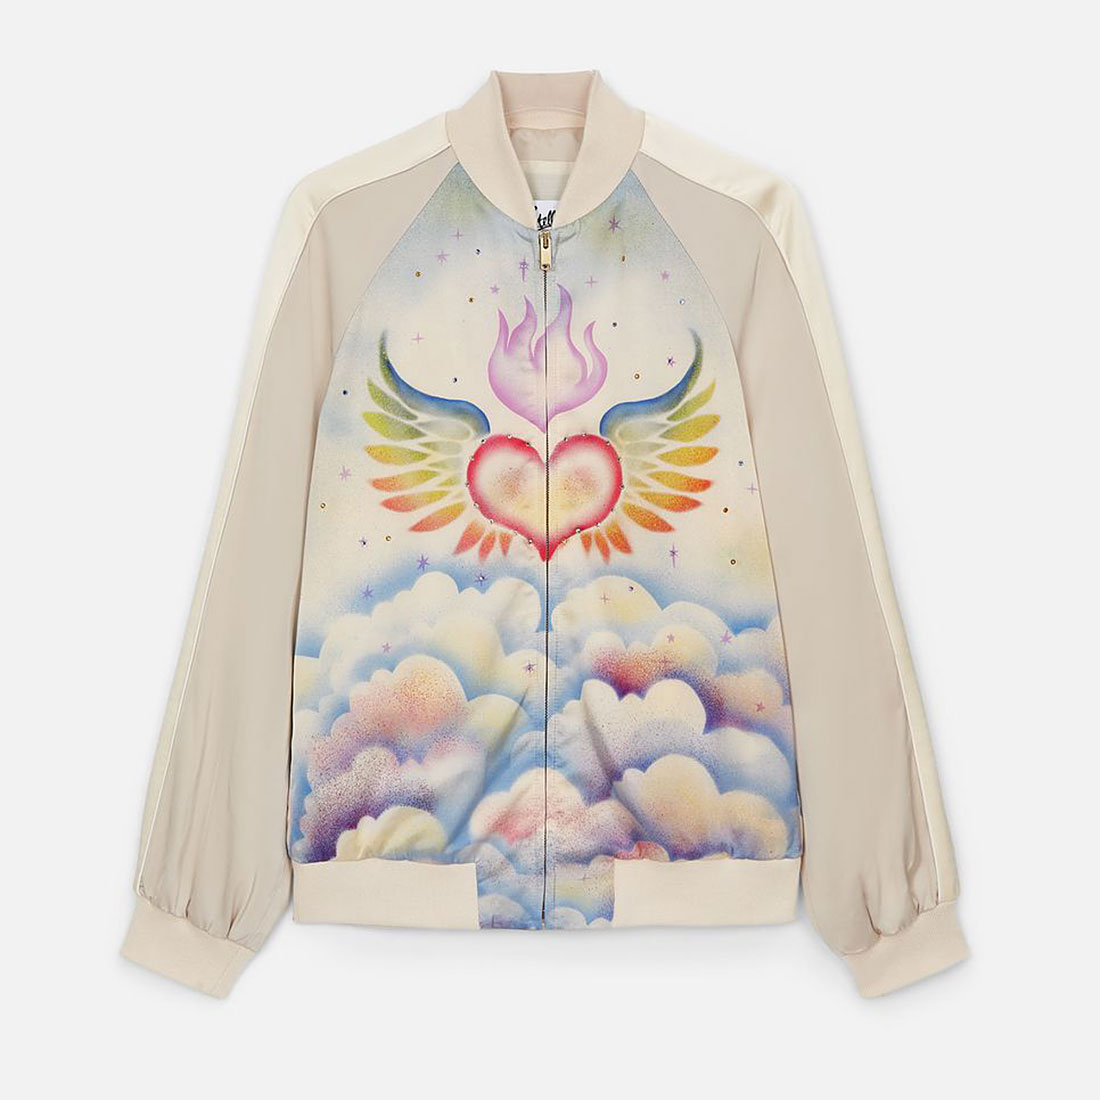 Taylor Swift And Stella McCartney Team Up For 'Lover' Merch